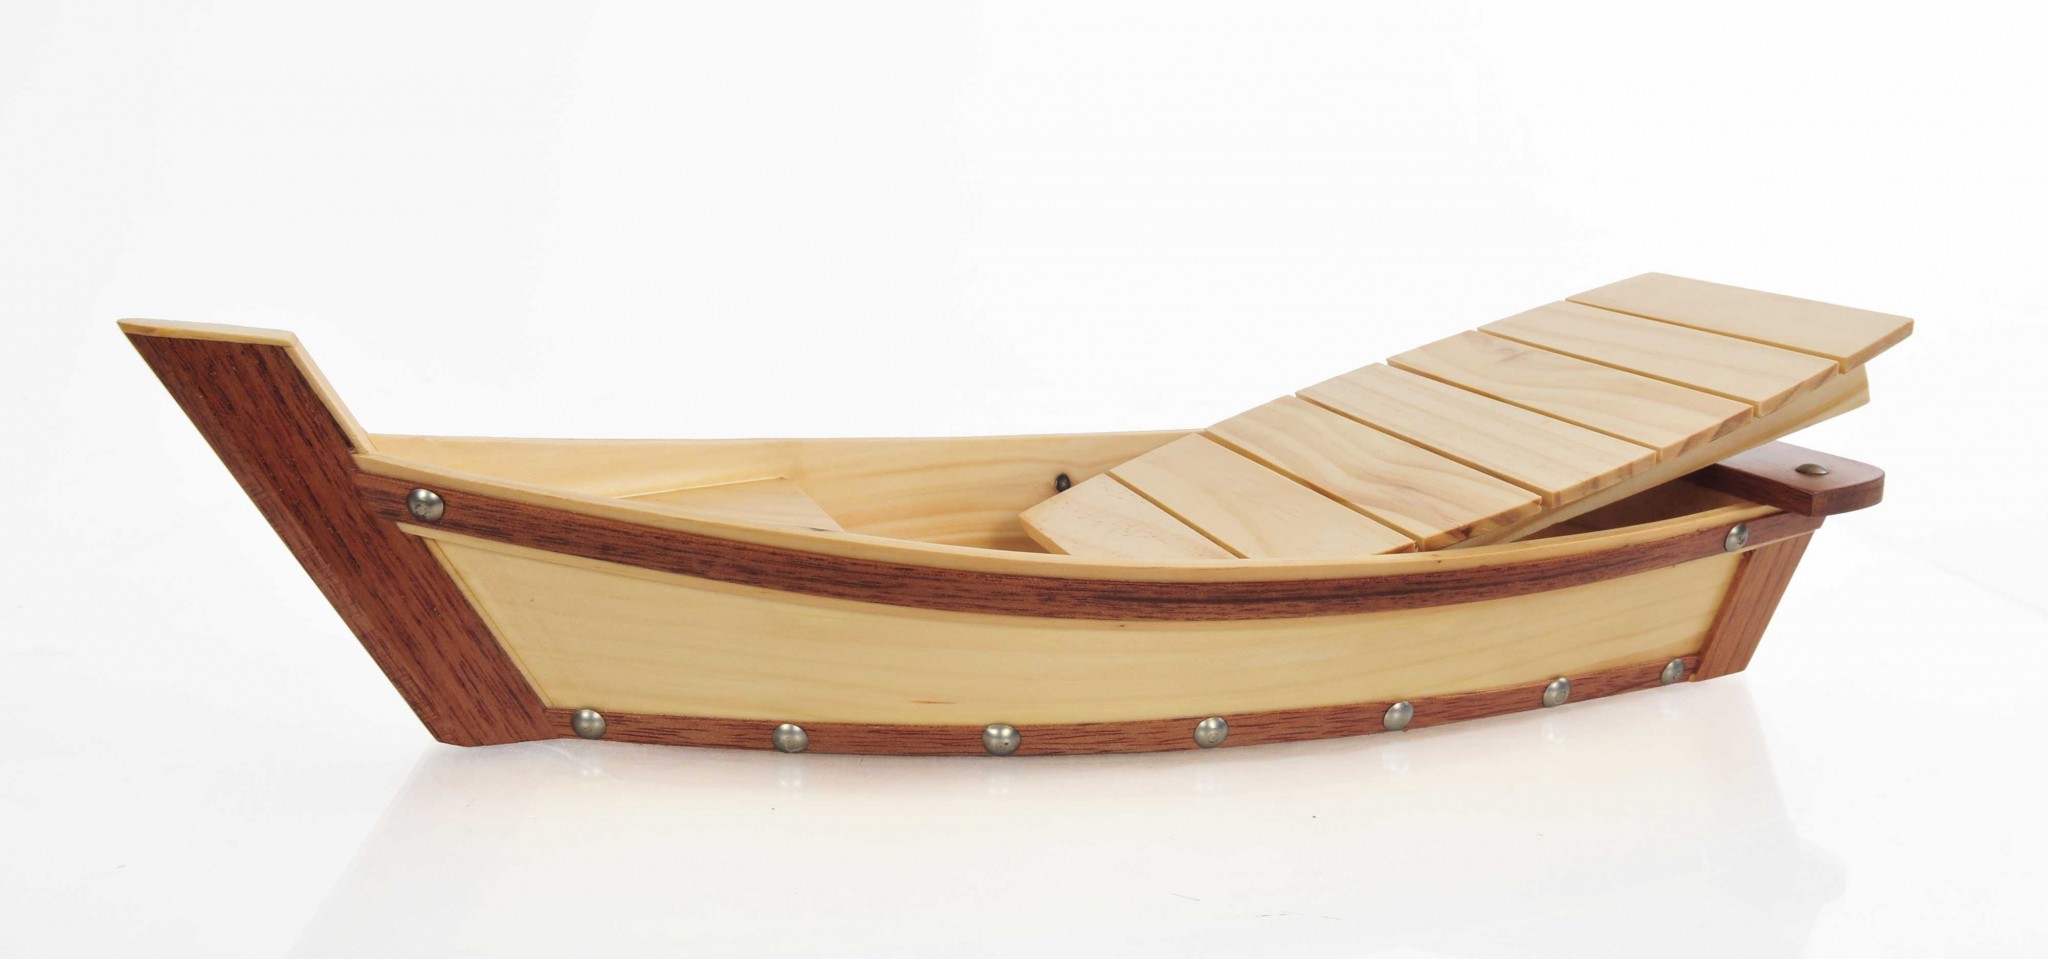 6.25" x 16.75" x 3.37" Small, Wooden, Sushi Boat - Serving Tray